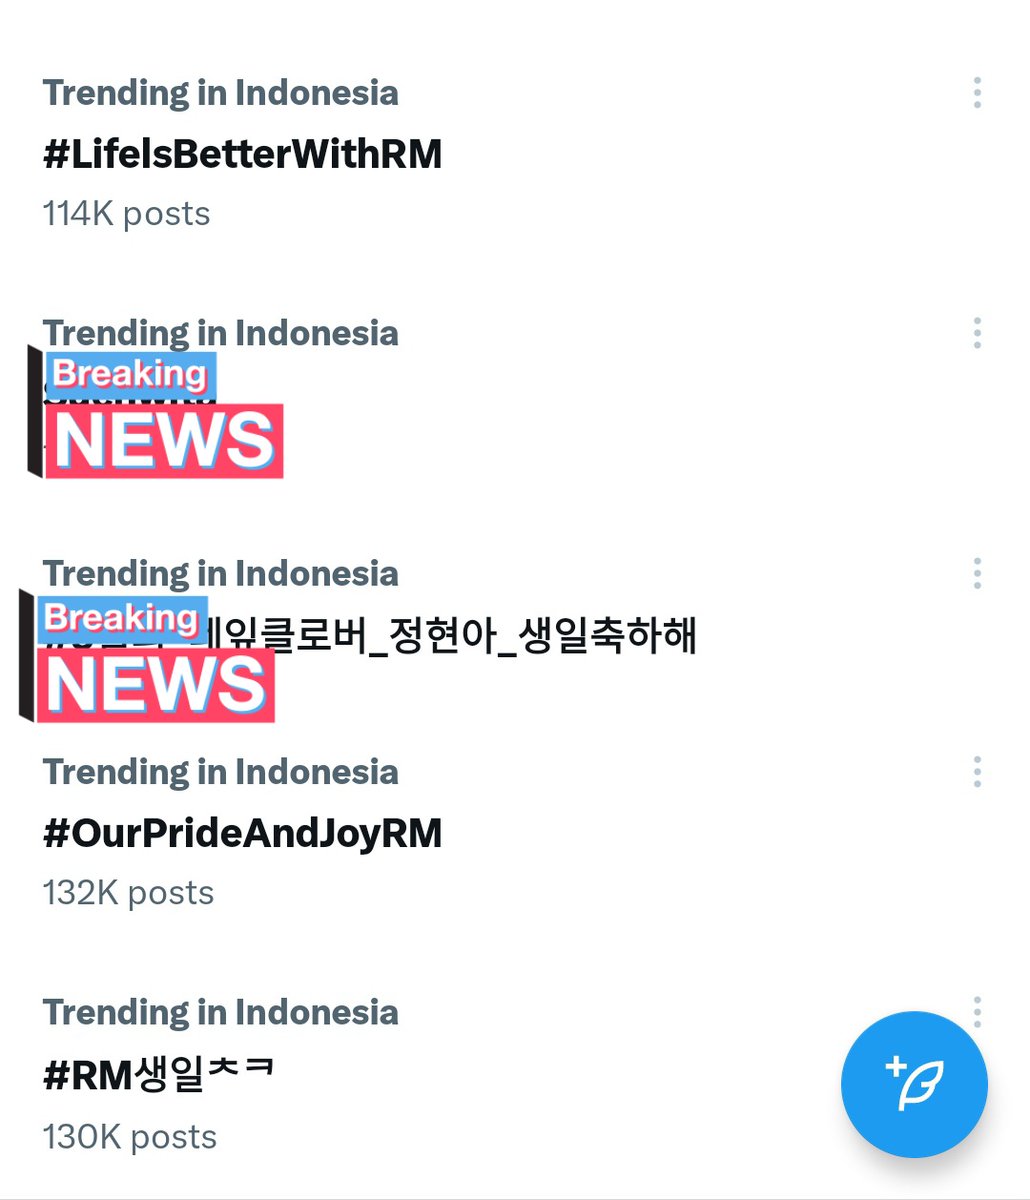 It's beautiful to see the trending today

#WeHealWithRM #OurPrideAndJoyRM #LifeIsBetterWithRM #RMLivingHisWay 
#OurWildFlowerRM #OurFlowerFieldRM #OurTrendsetterRM 
#HappyRMDay